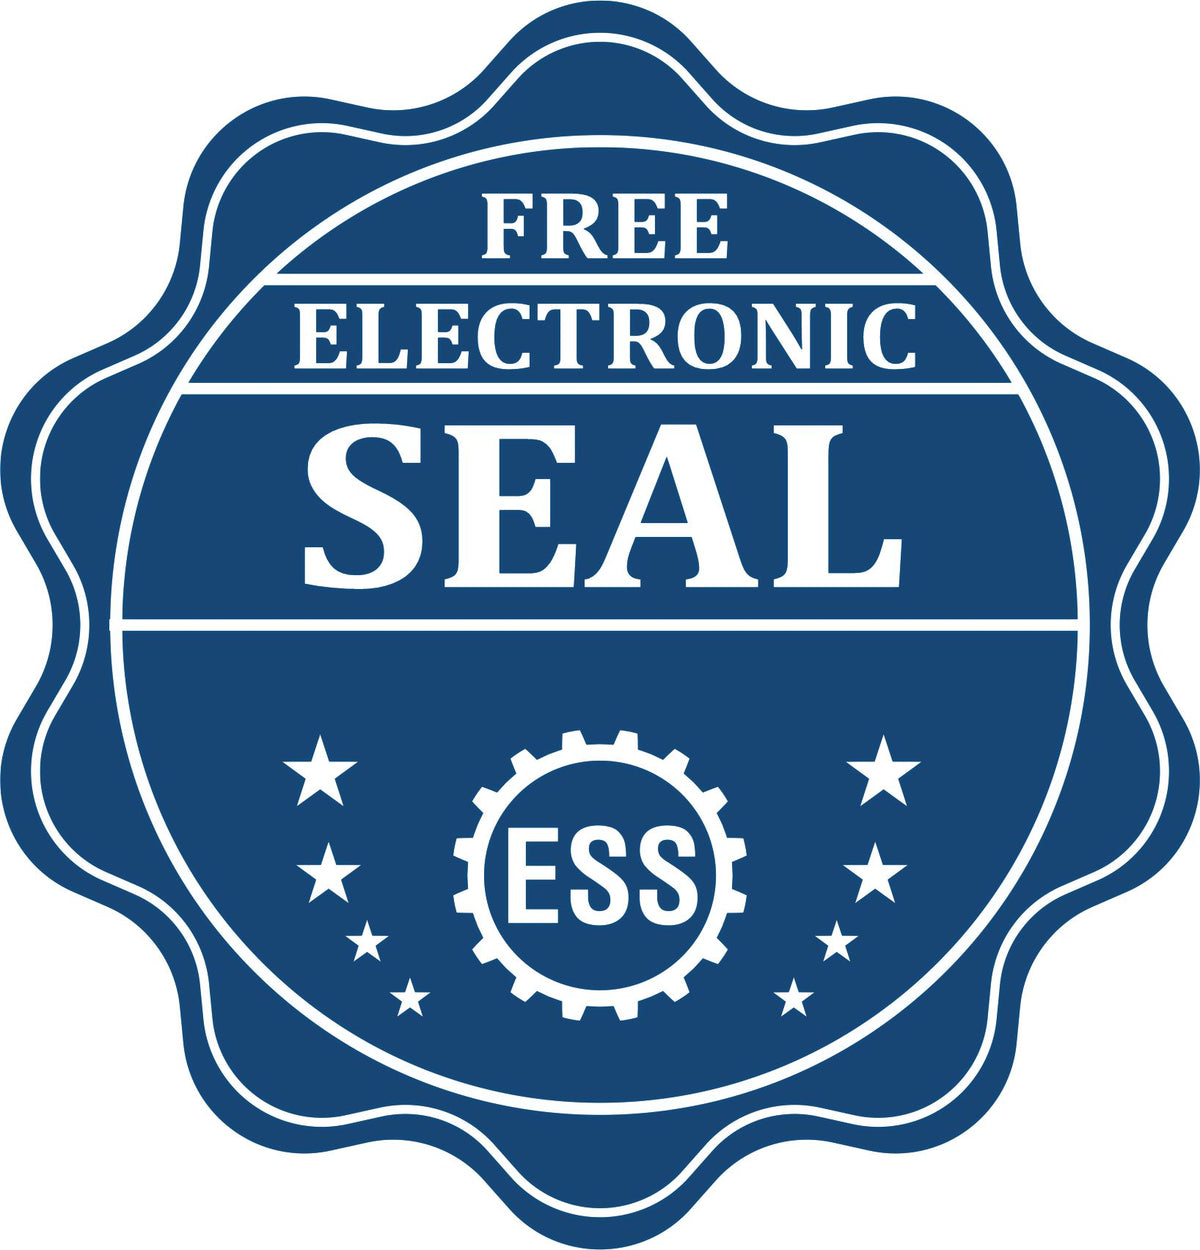 A badge showing a free electronic seal for the Soft Maryland Professional Geologist Seal with stars and the ESS gear on the emblem.